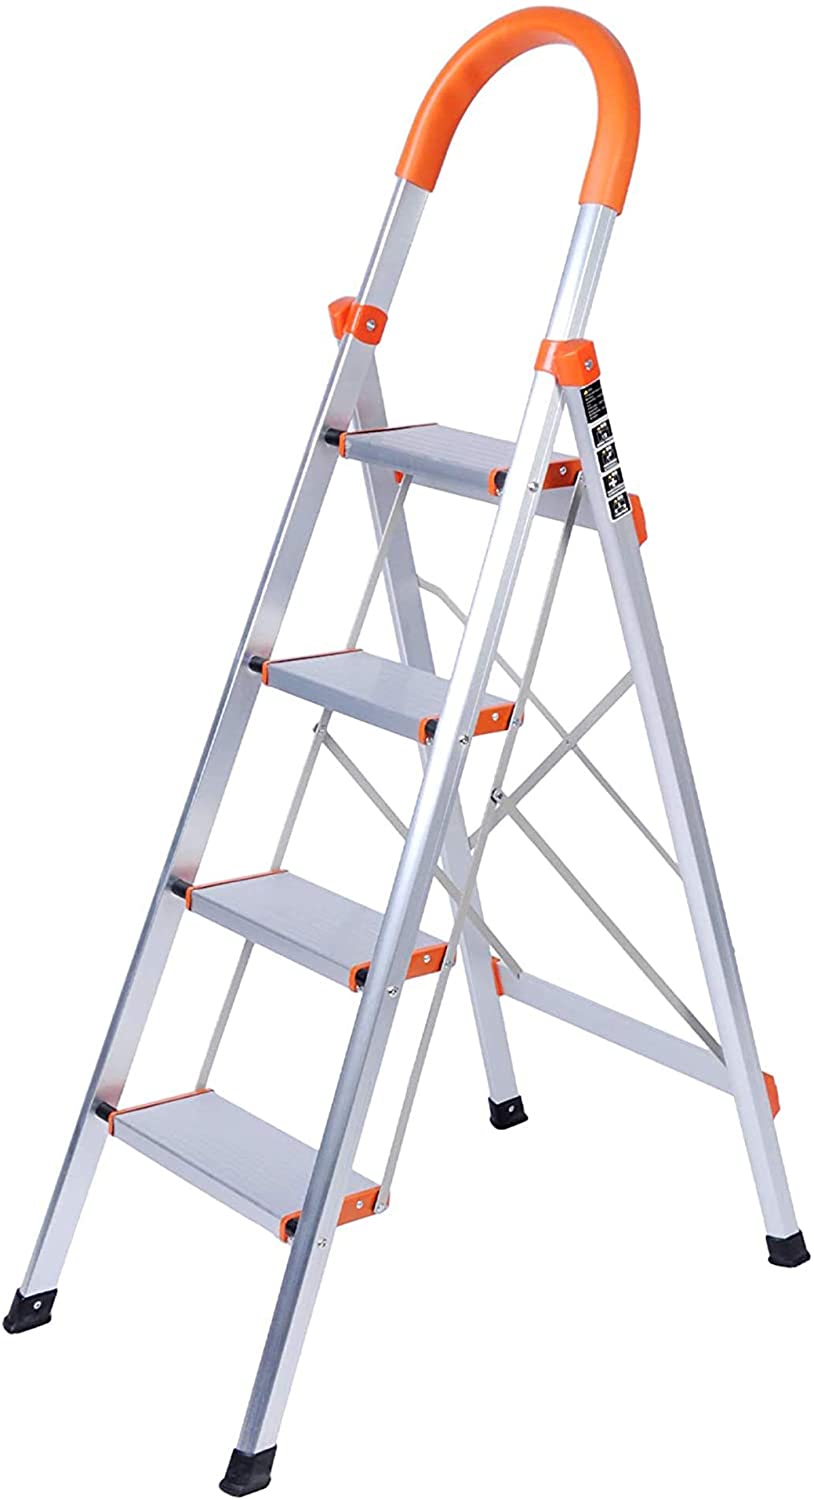 Portable Step Ladder 4 Step for Adults, Sturdy Aluminum 4 Step Stool with Handgrip for Kitchen, 220lbs Capacity